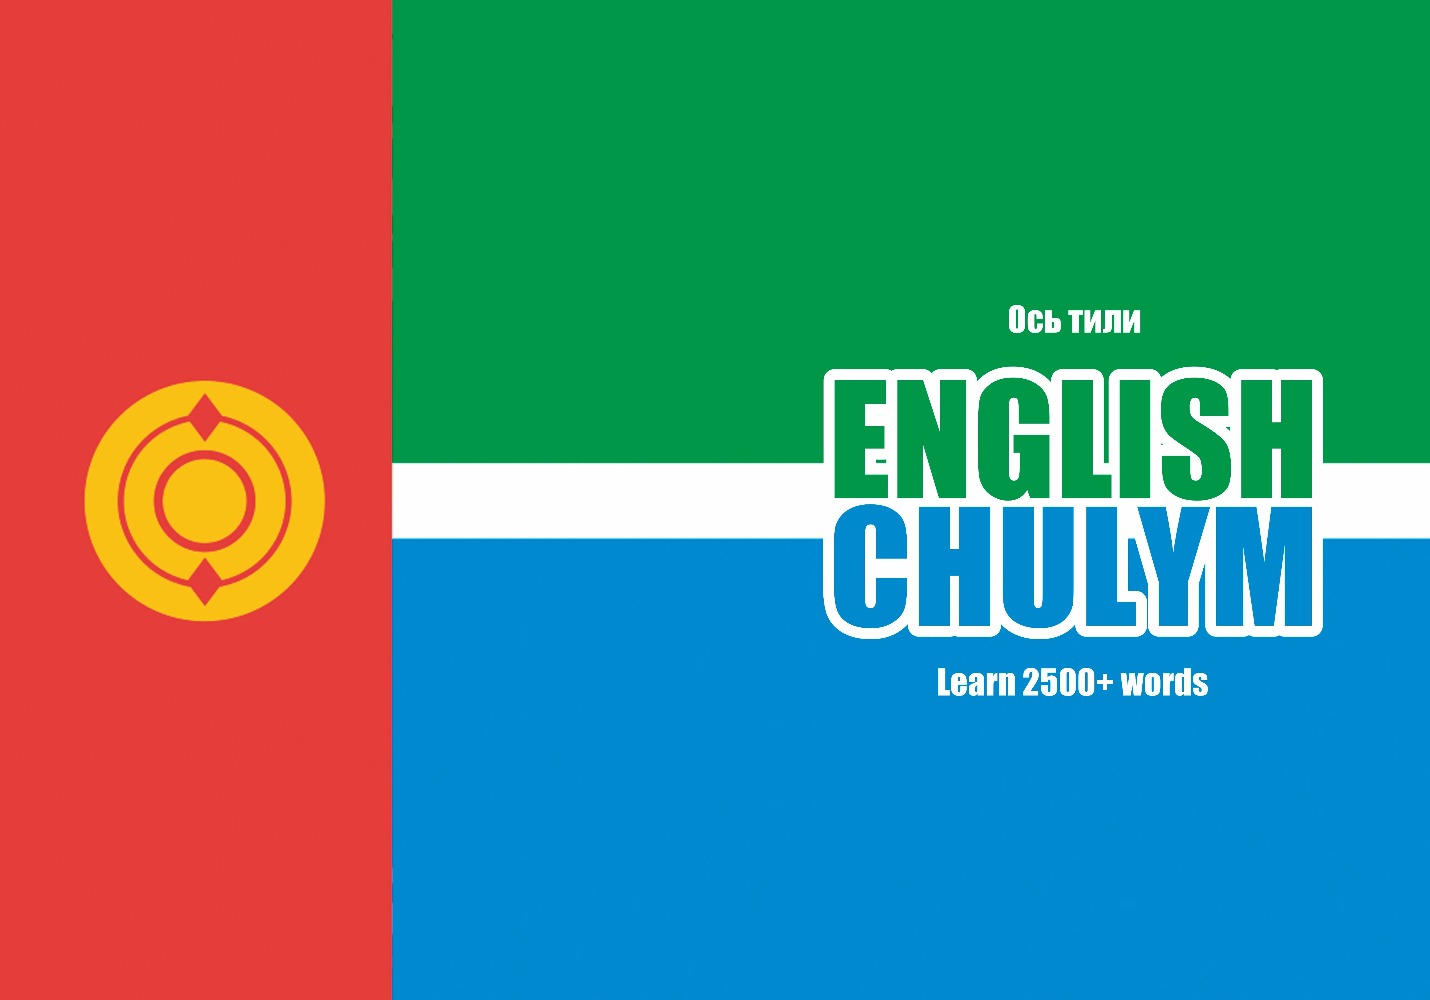 Chulym language learning notebook cover